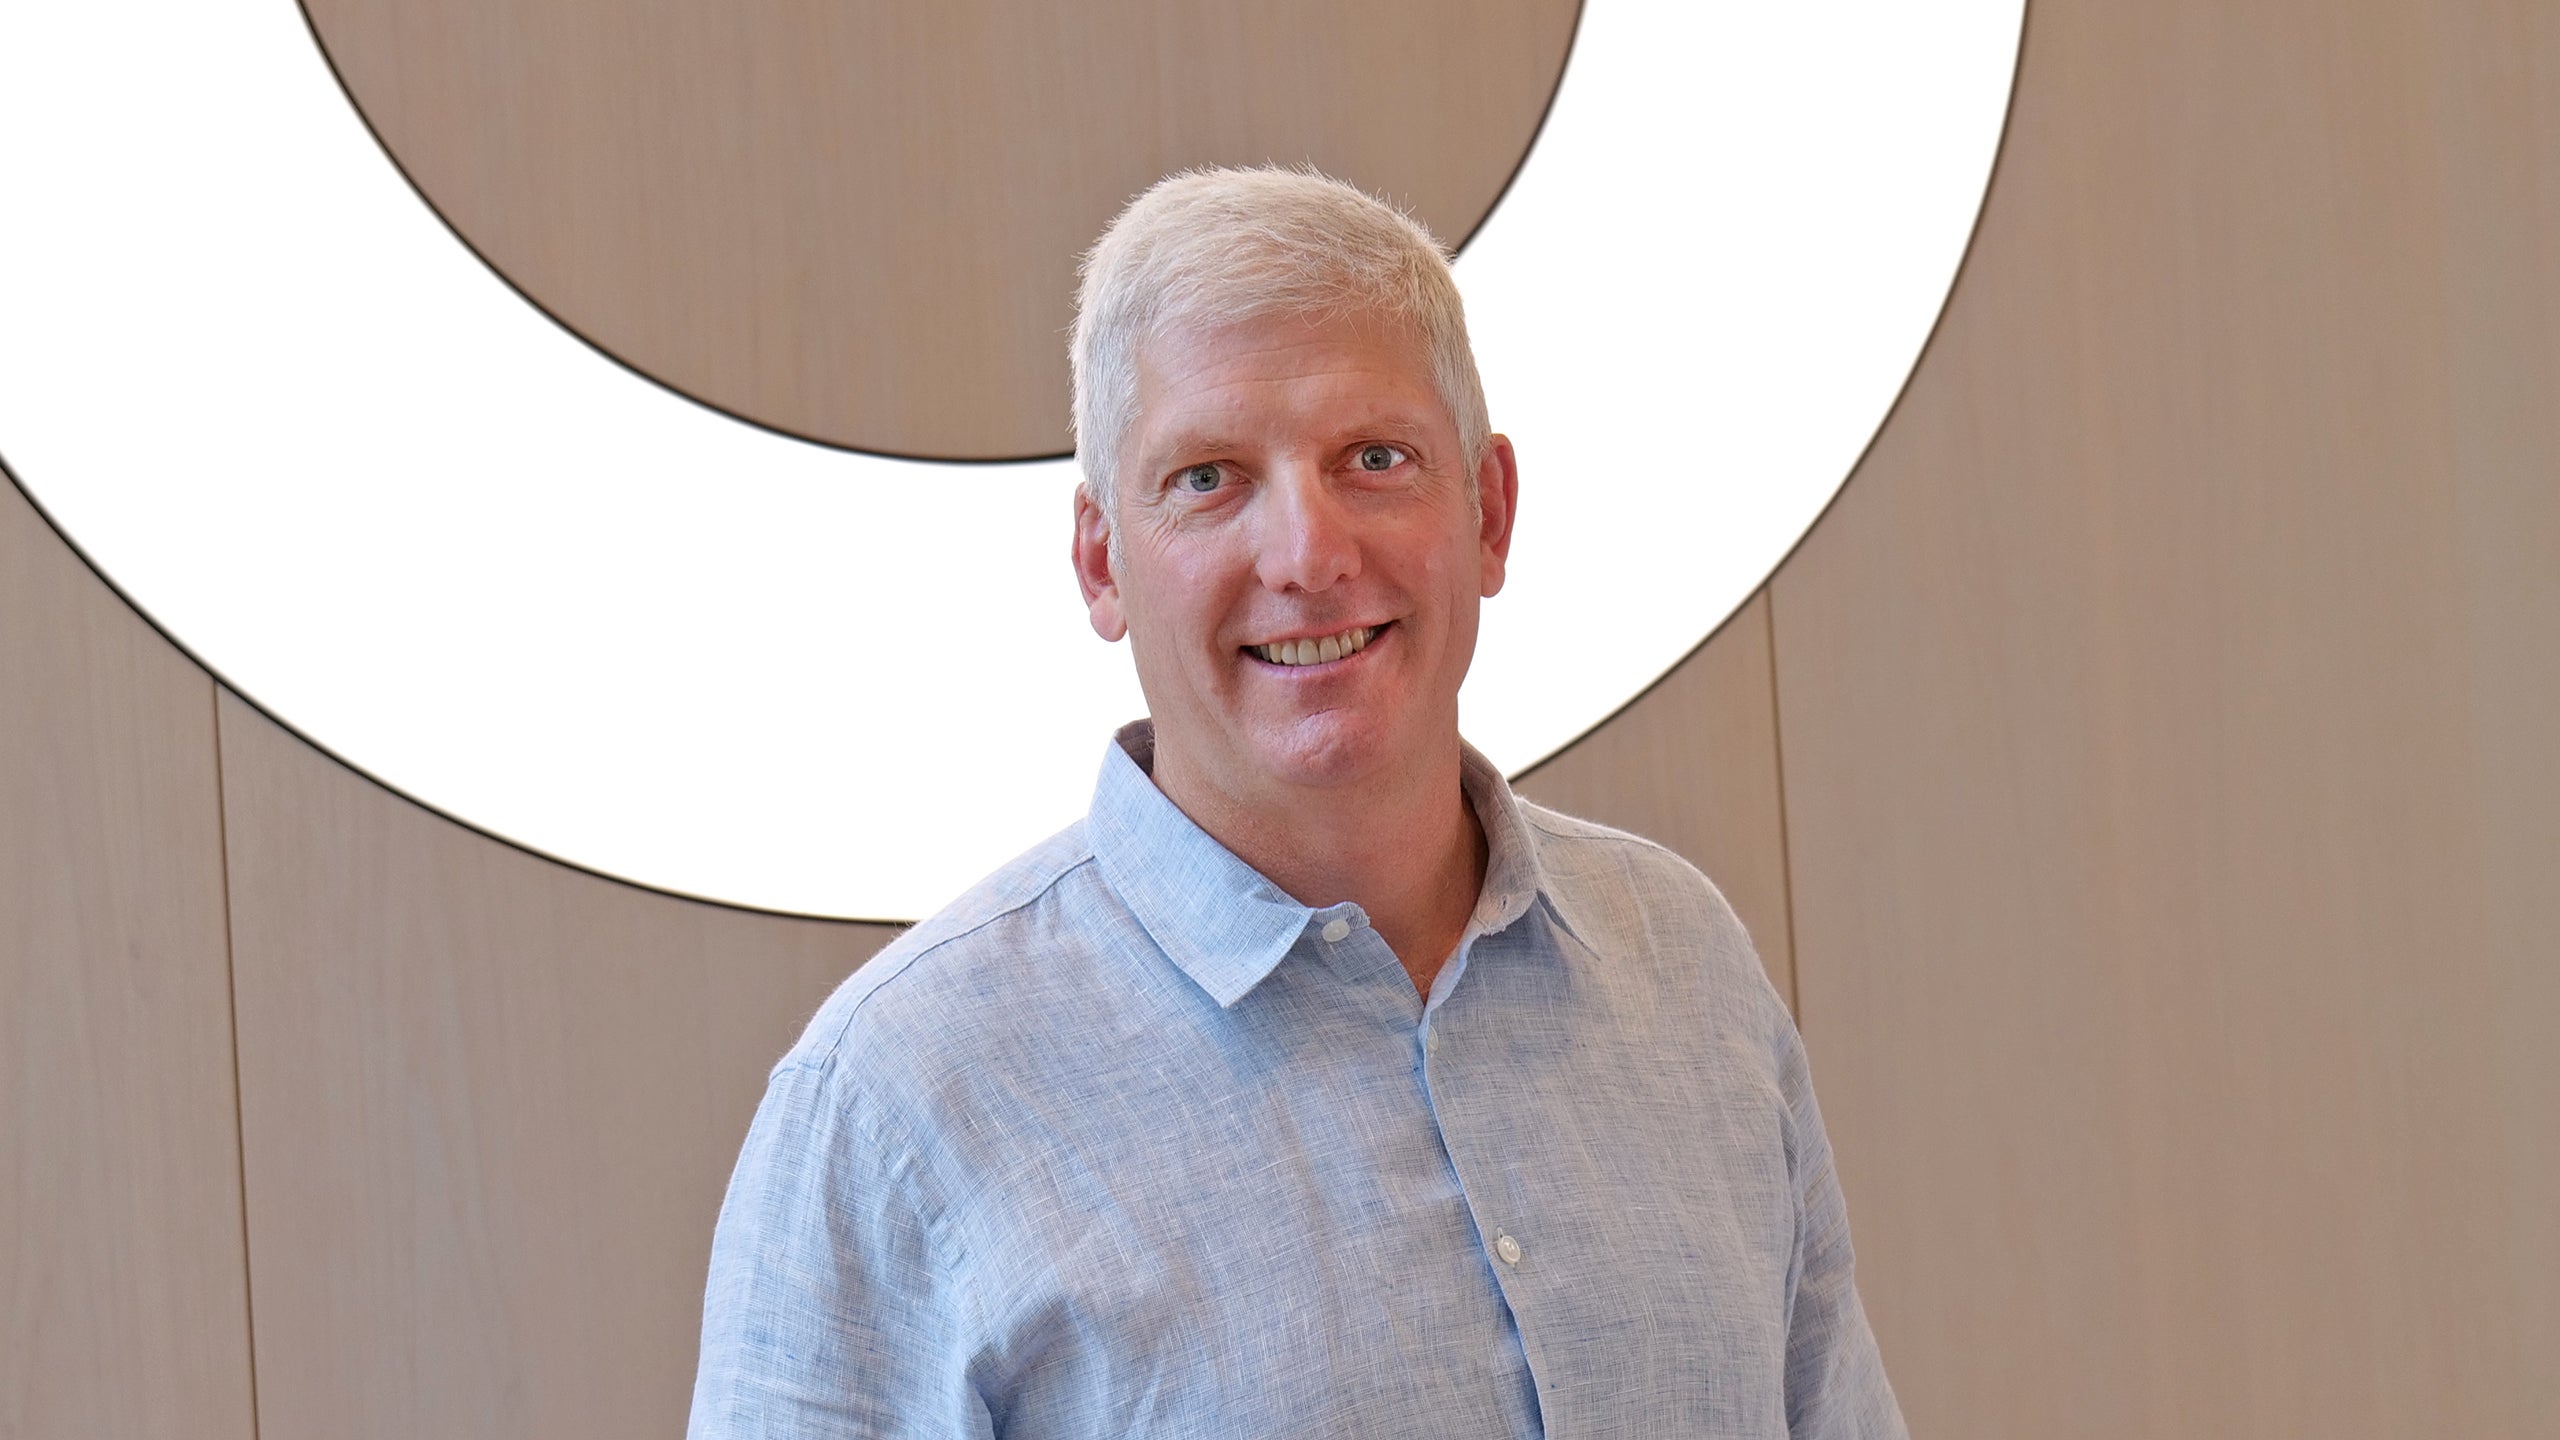 Rick Osterloh, Google's senior vice president of devices & services, at the new Google Store in NYC.  (Photo: Sam Rutherford)